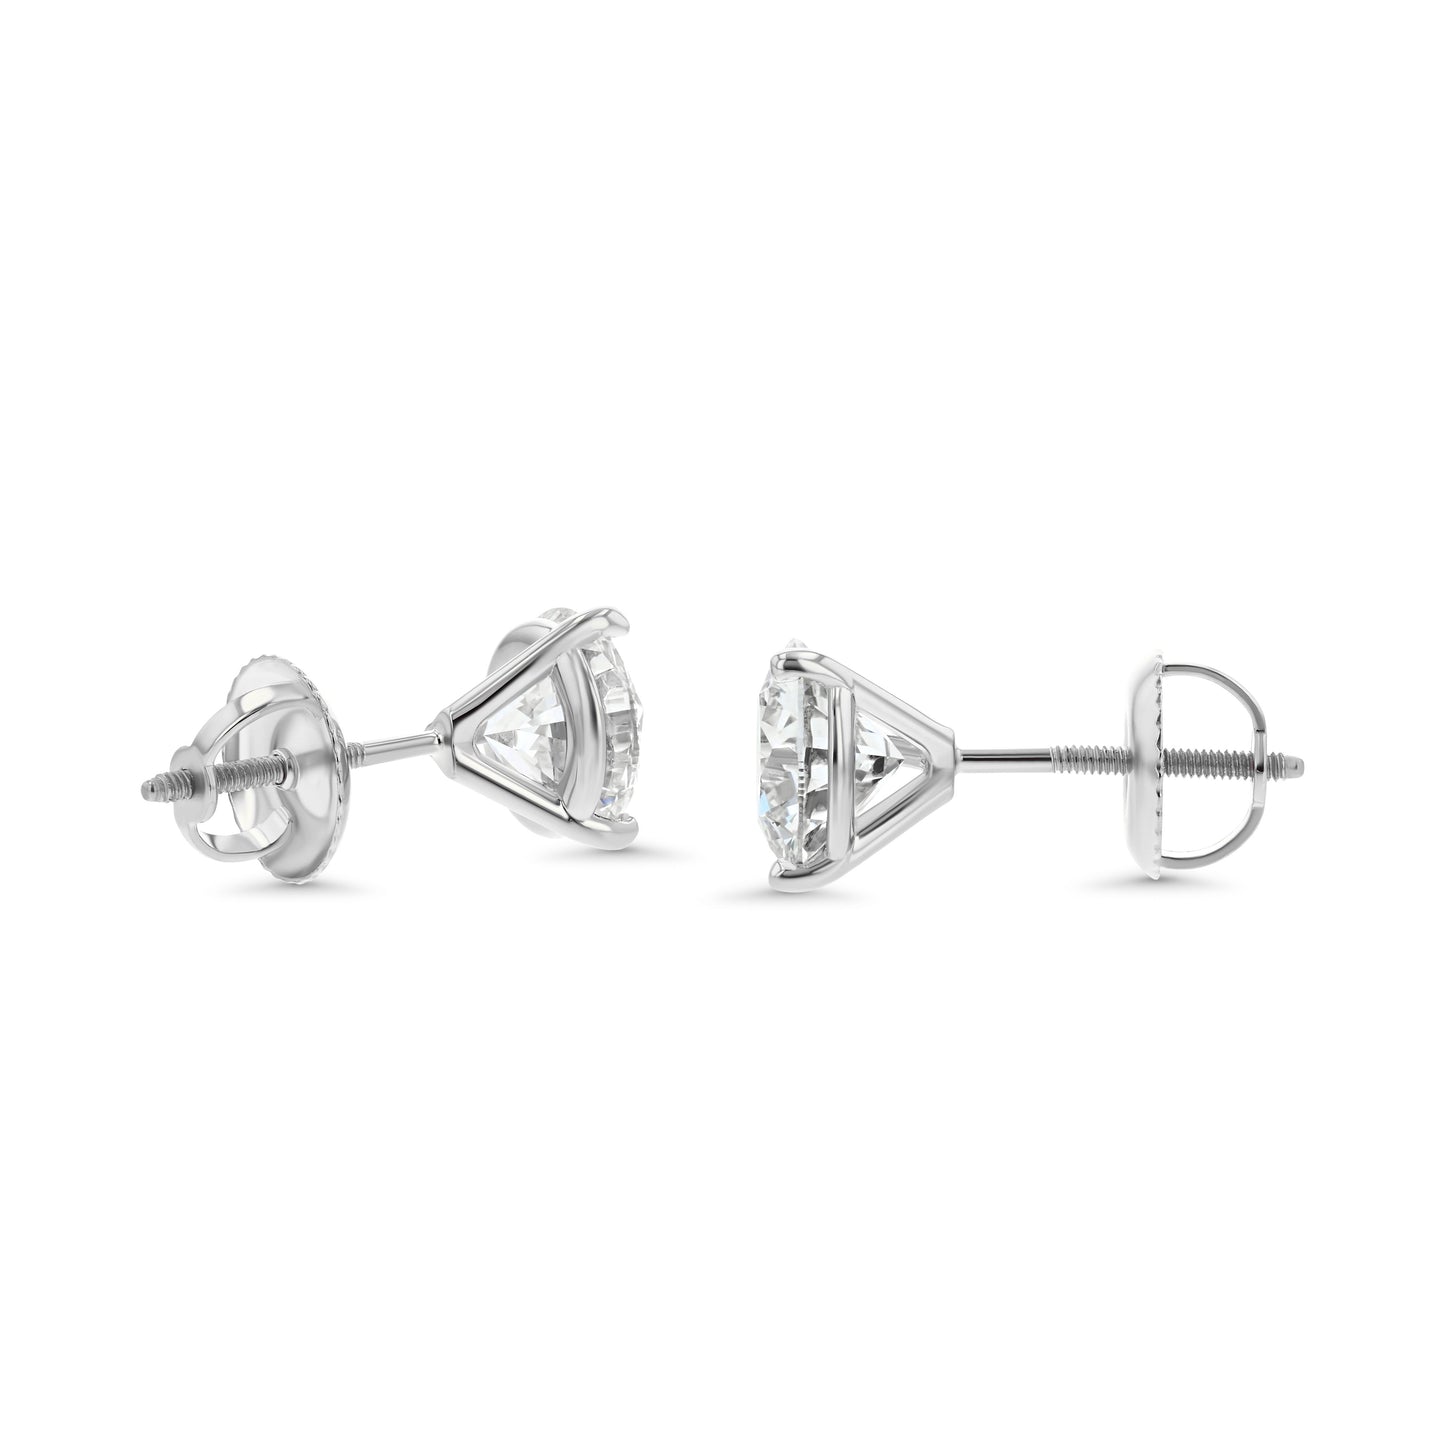 14k White Gold 3-prong Round Brilliant Diamond Stud Earrings (0.52 Ct. T.w., Si1-si2 Clarity, J-k Color)